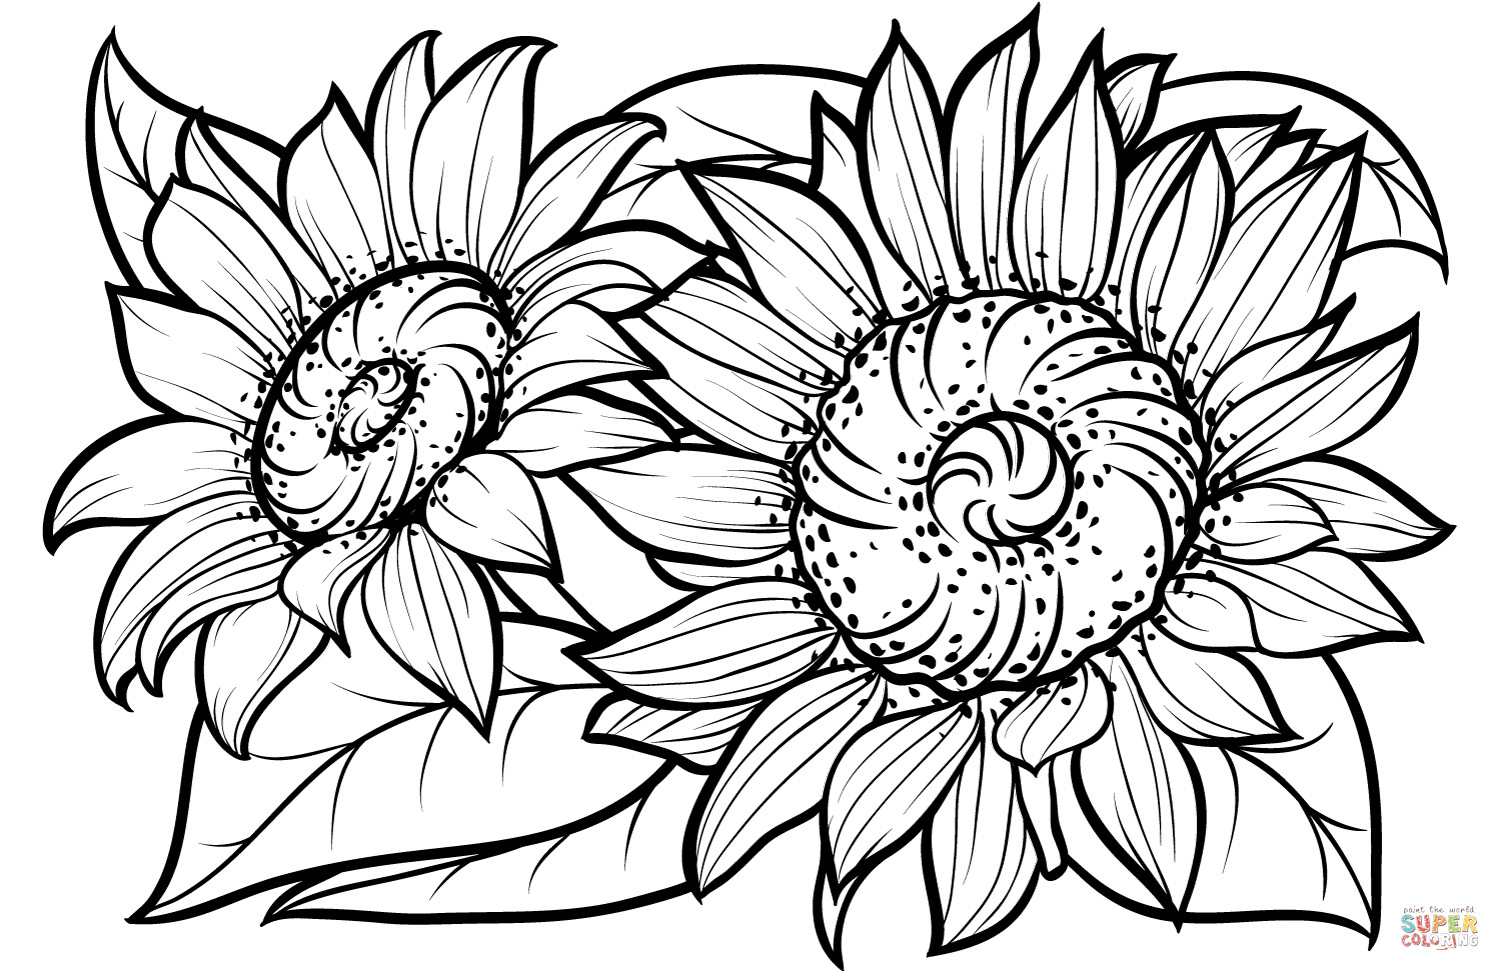 Sunflower Coloring Pages Printable
 Sunflowers coloring page